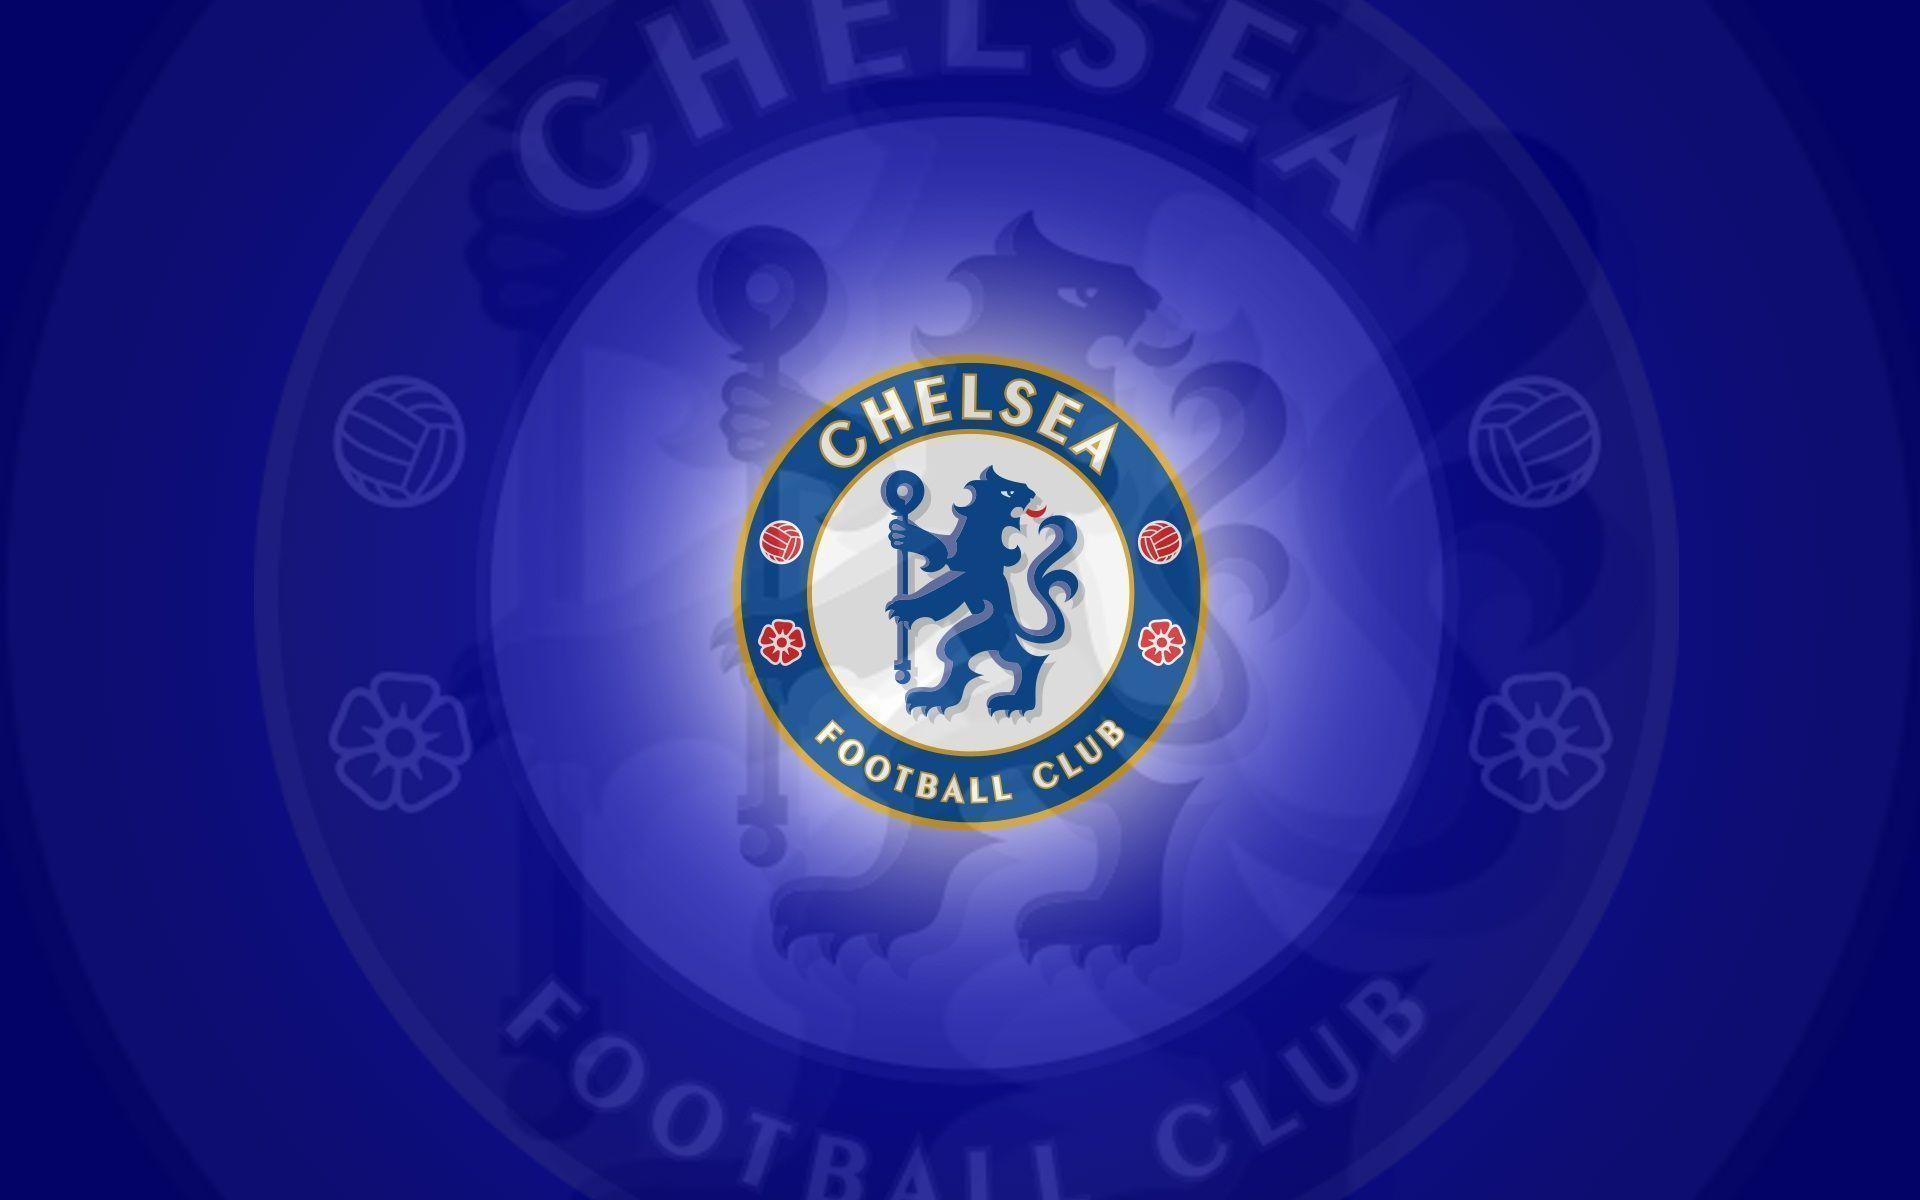 Chelsea Full HD wallpaper for IPhone PC Android 2015. Pakistani